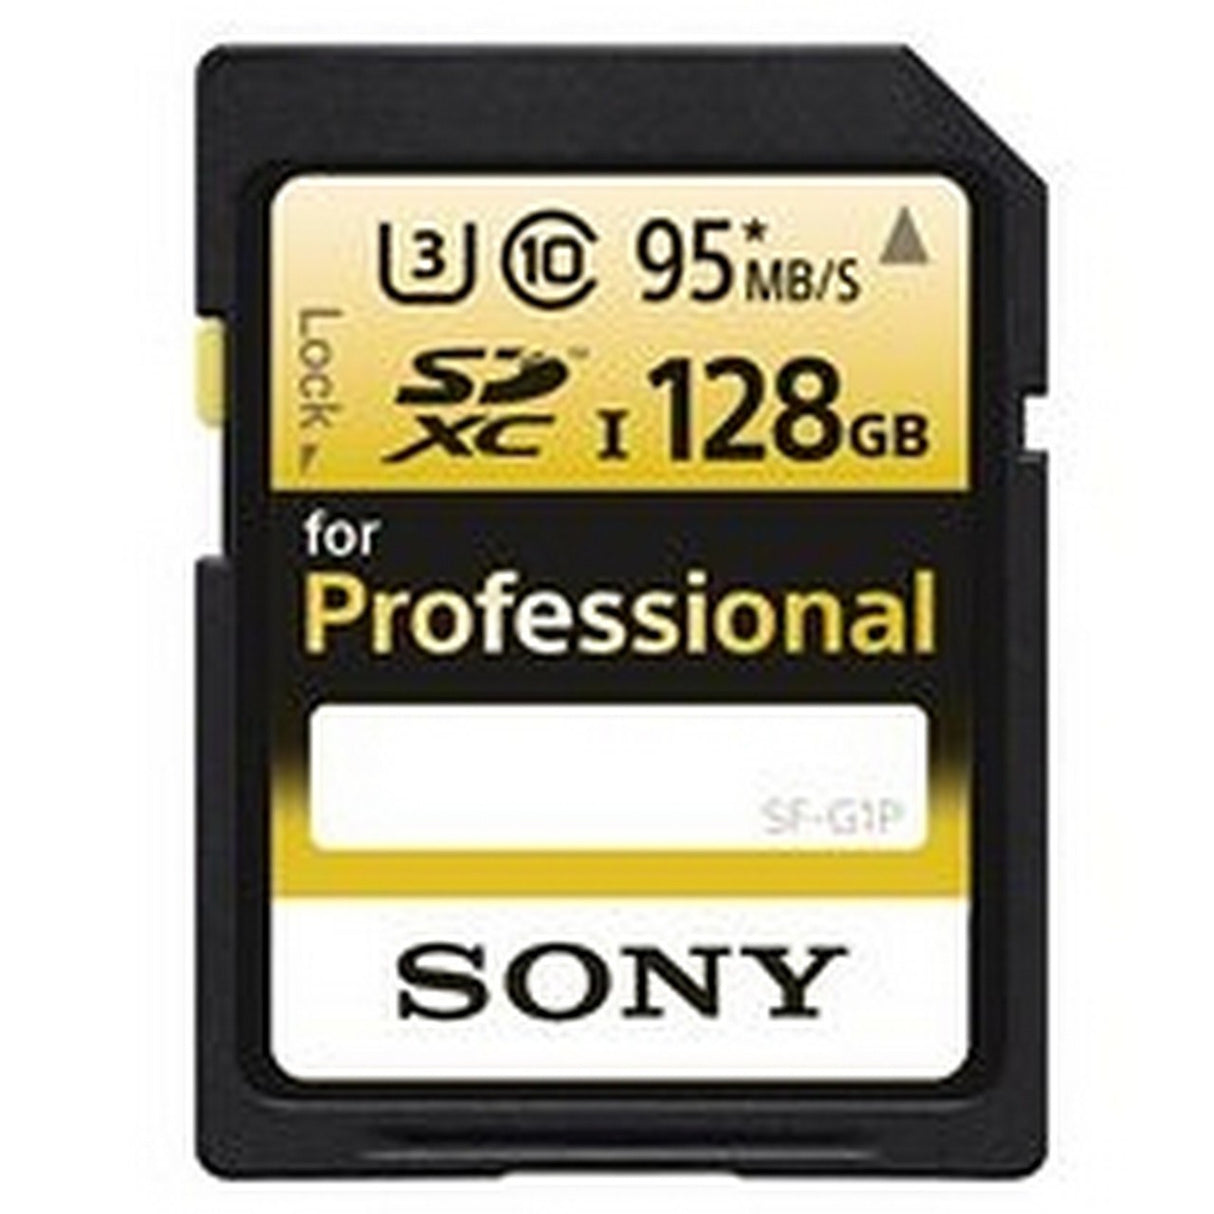 Sony SF-G1P | 128GB SD Card for Professional Use